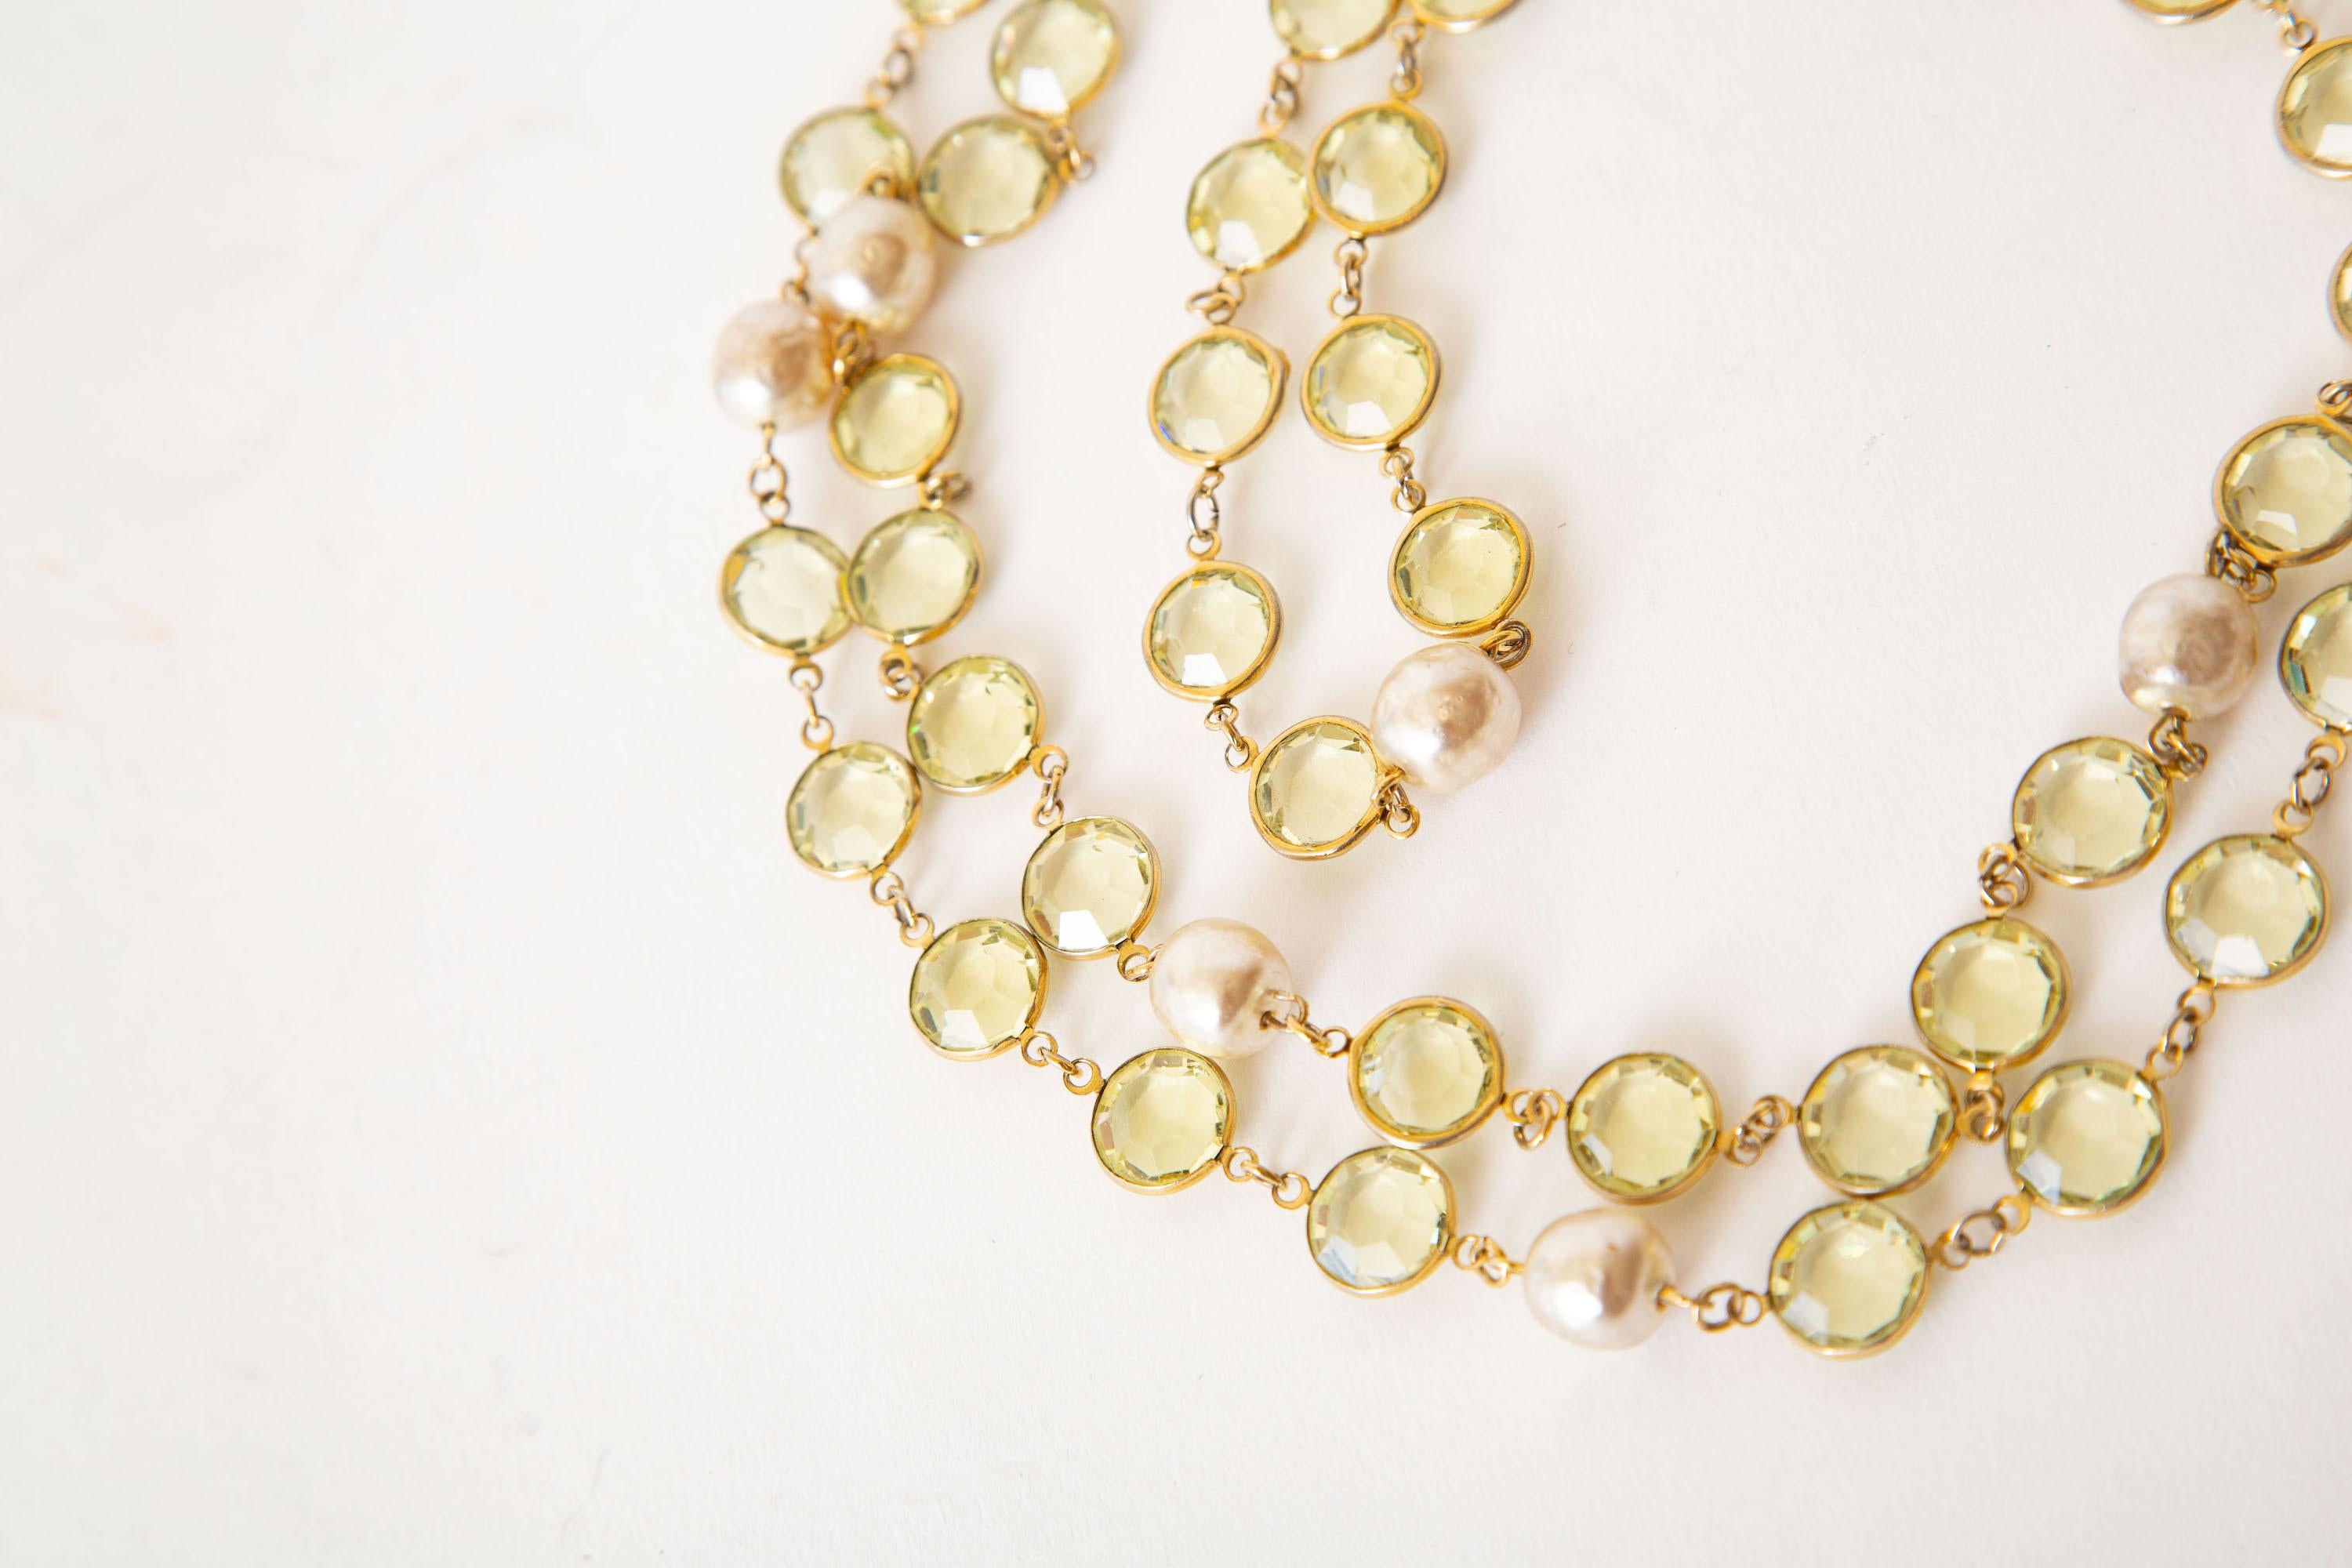 Vintage Chanel Chartreuse Beveled Crystals And Faux Pearl Sautoir Wrap Necklace 8